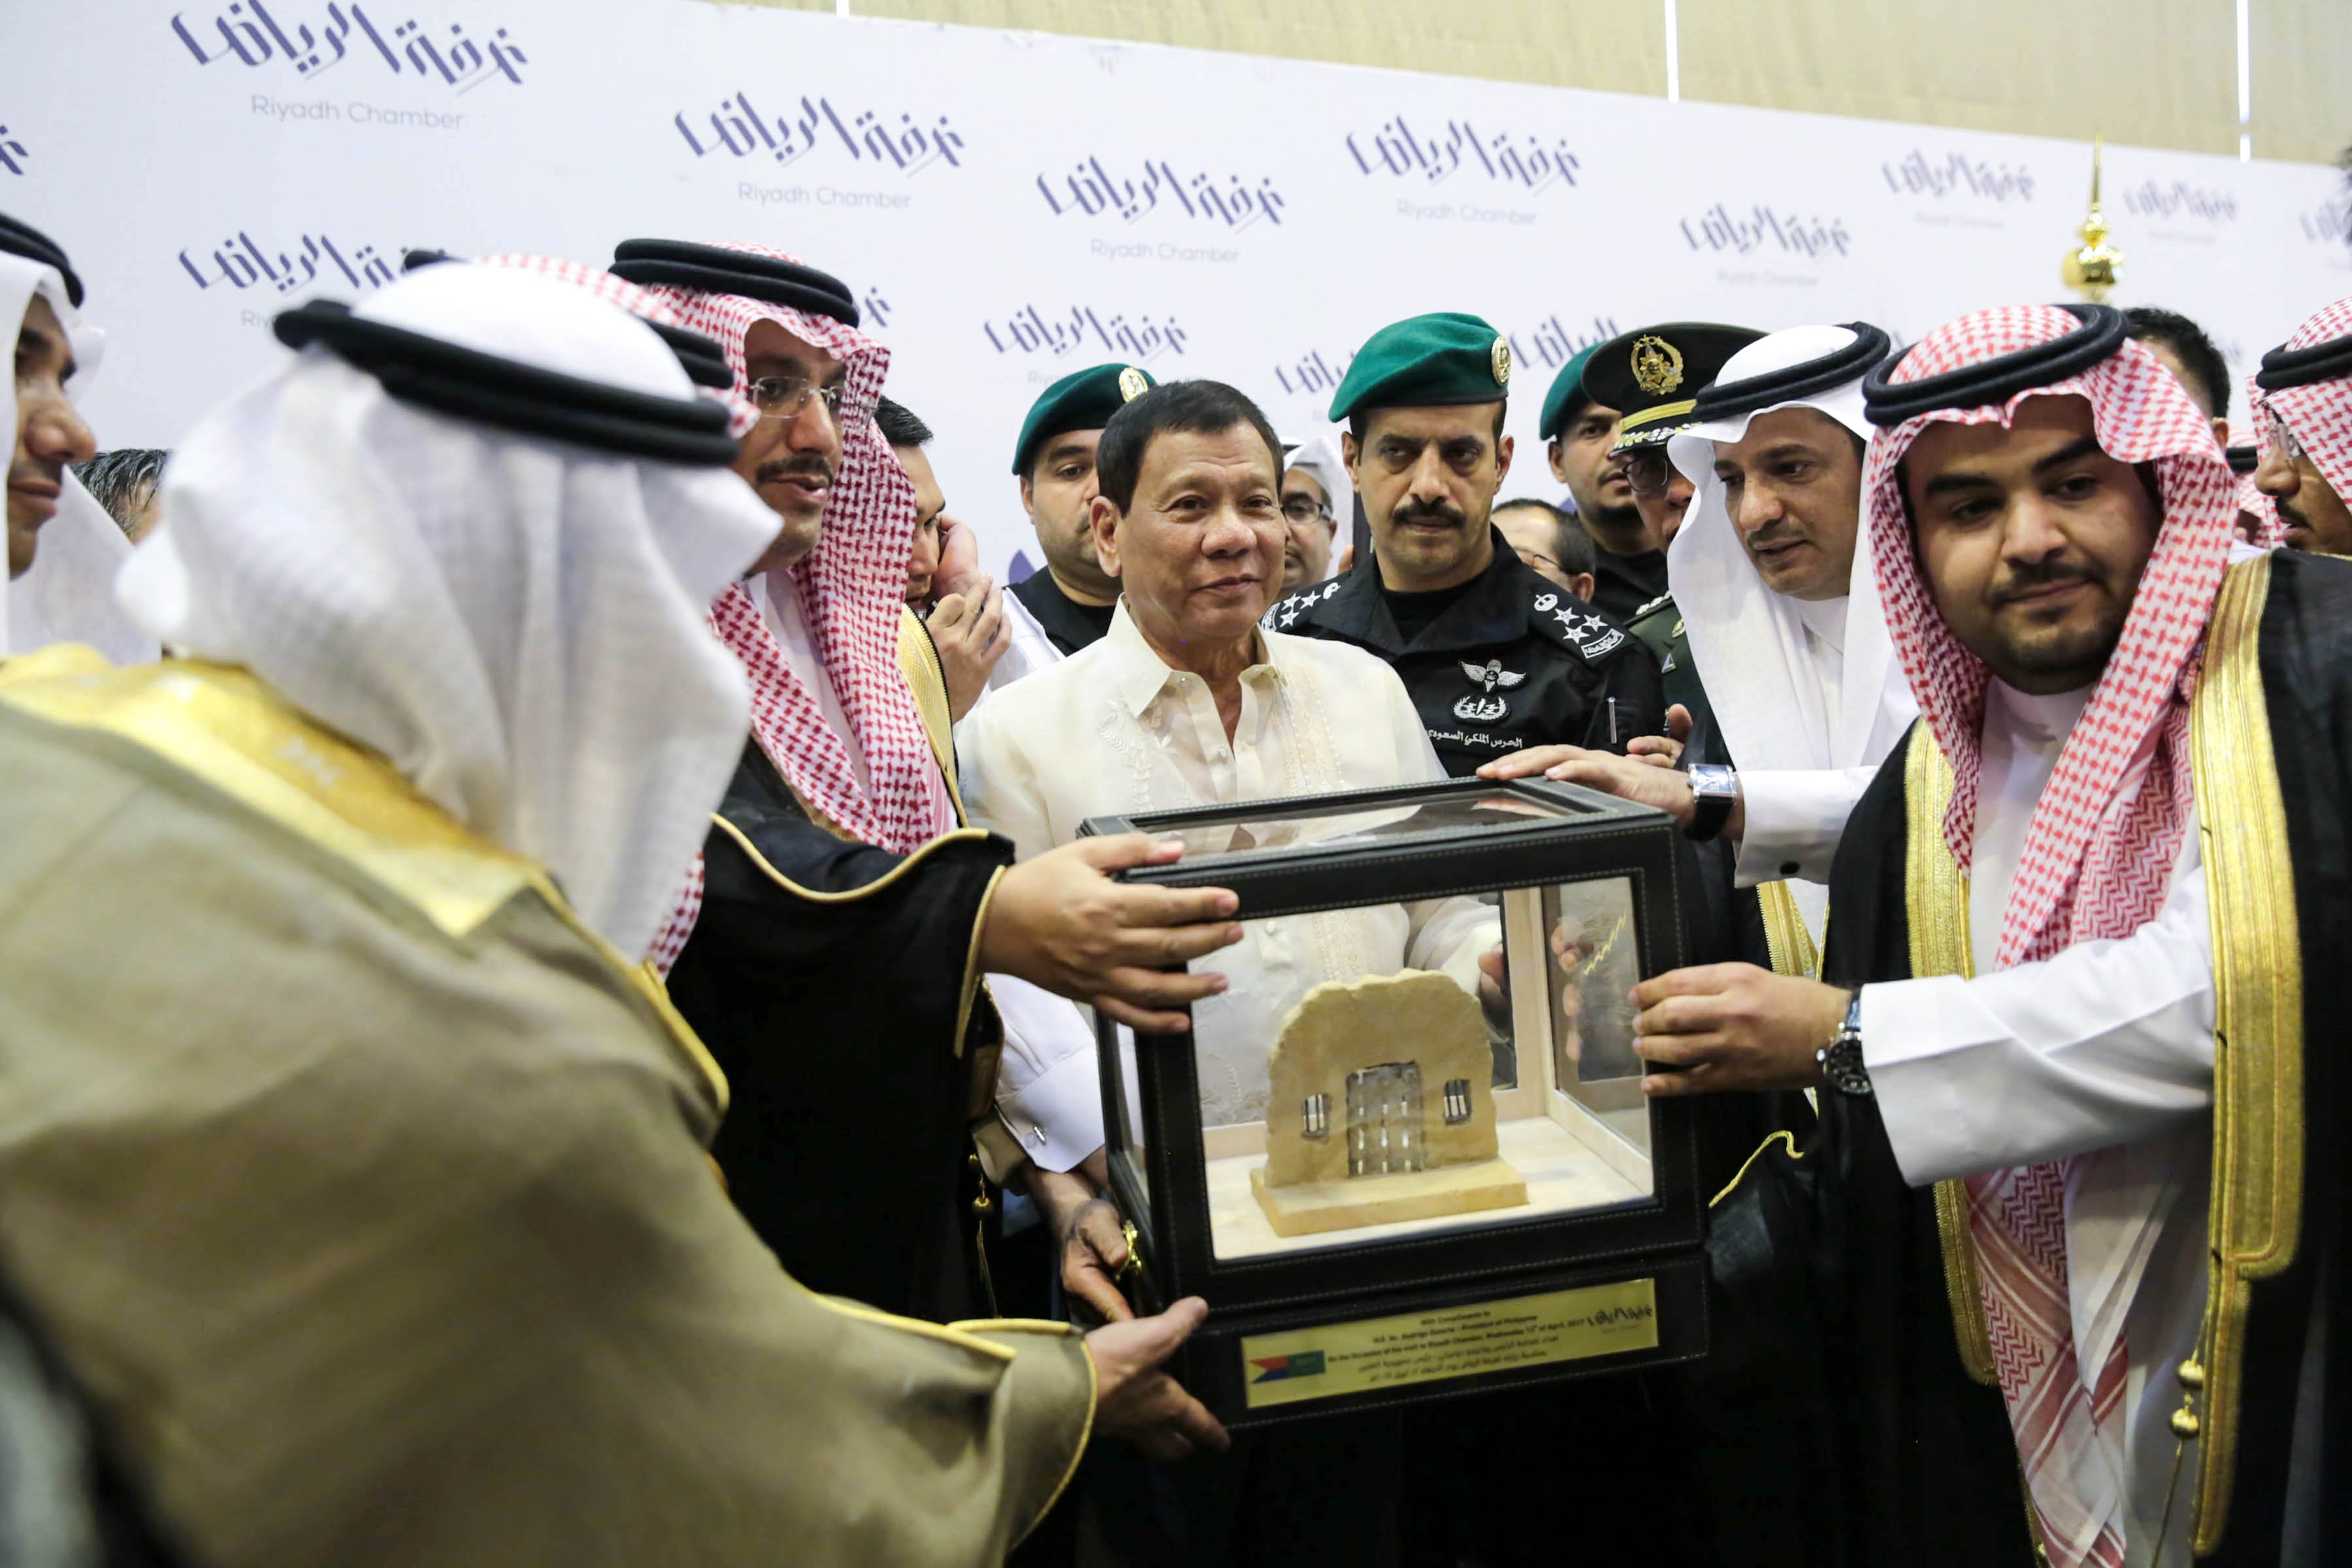 President Duterte receives a token from officials of the Riyadh Chamber of Commerce